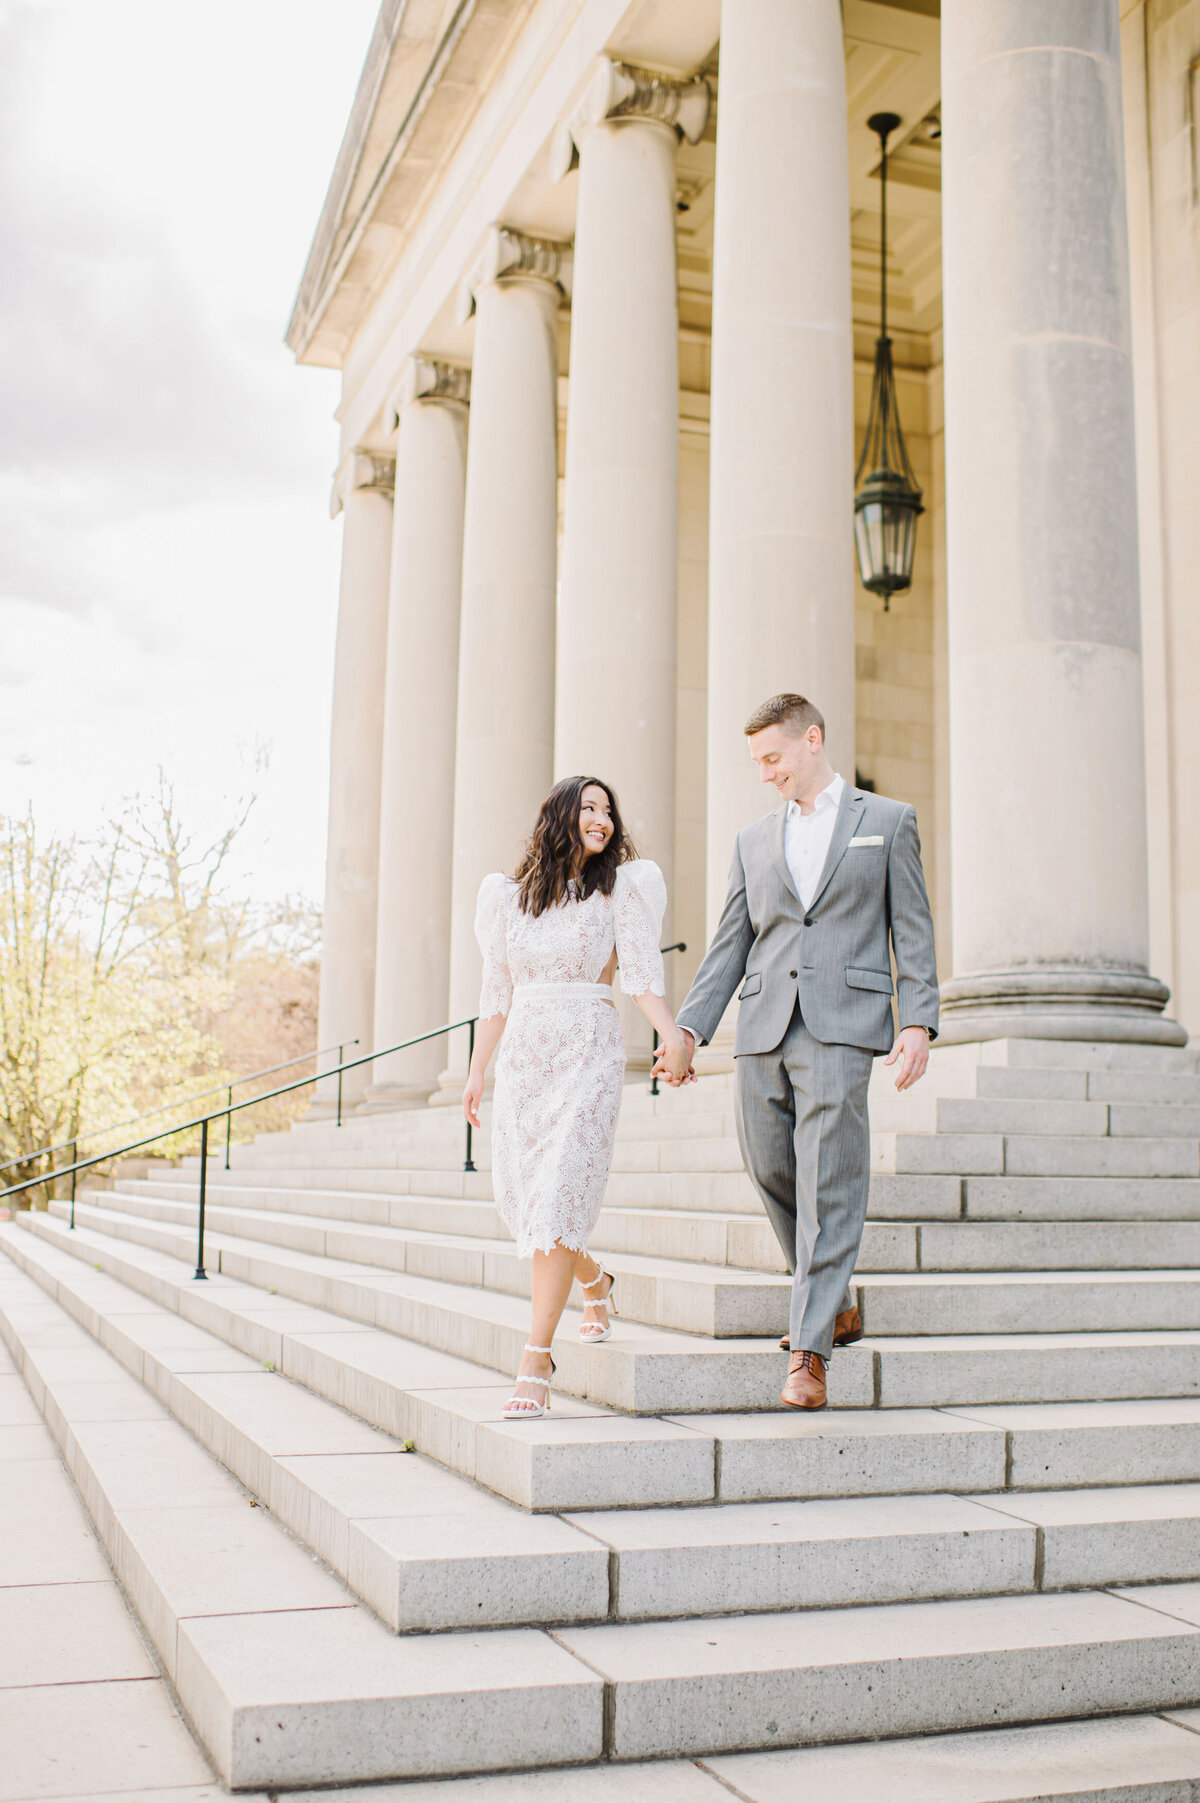 Stylish BMA engagement session Baltimore l hewitt photography-2